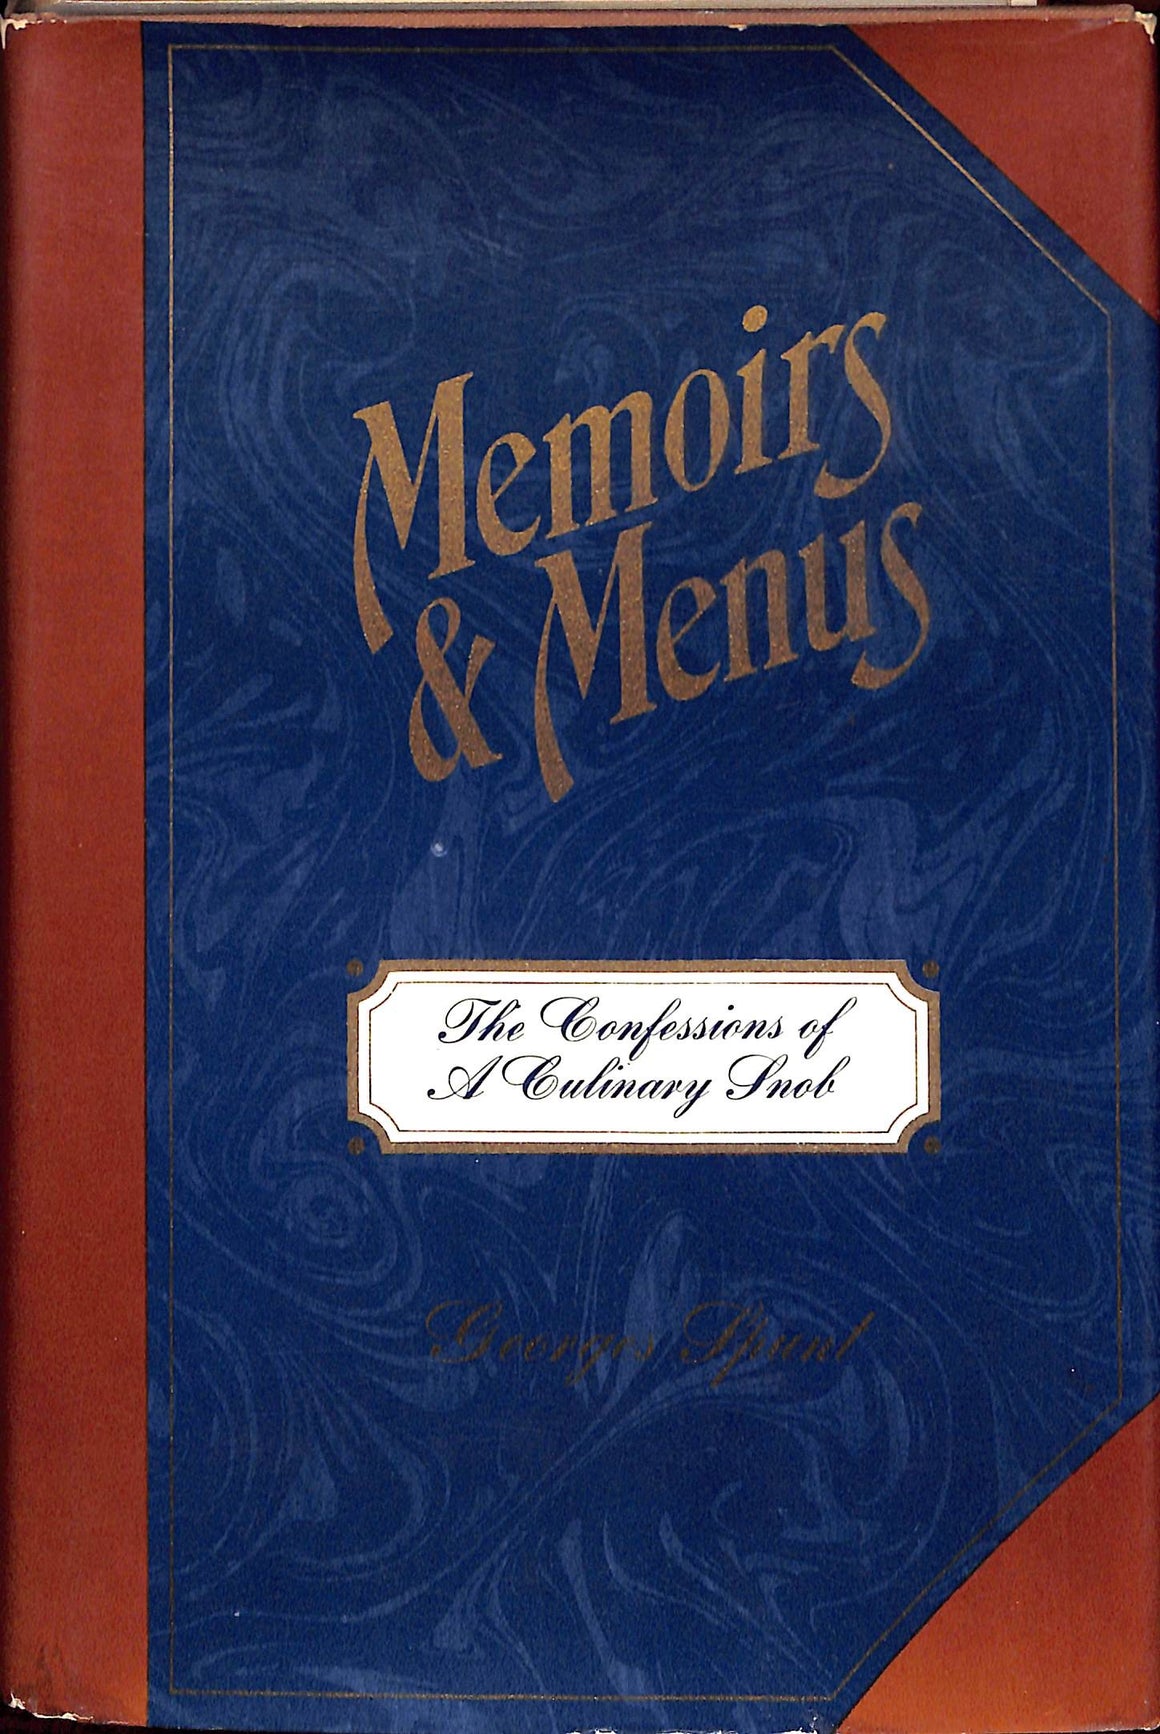 "Memoirs & Menus: The Confessions of a Culinary Snob" 1967 Spunt, Georges